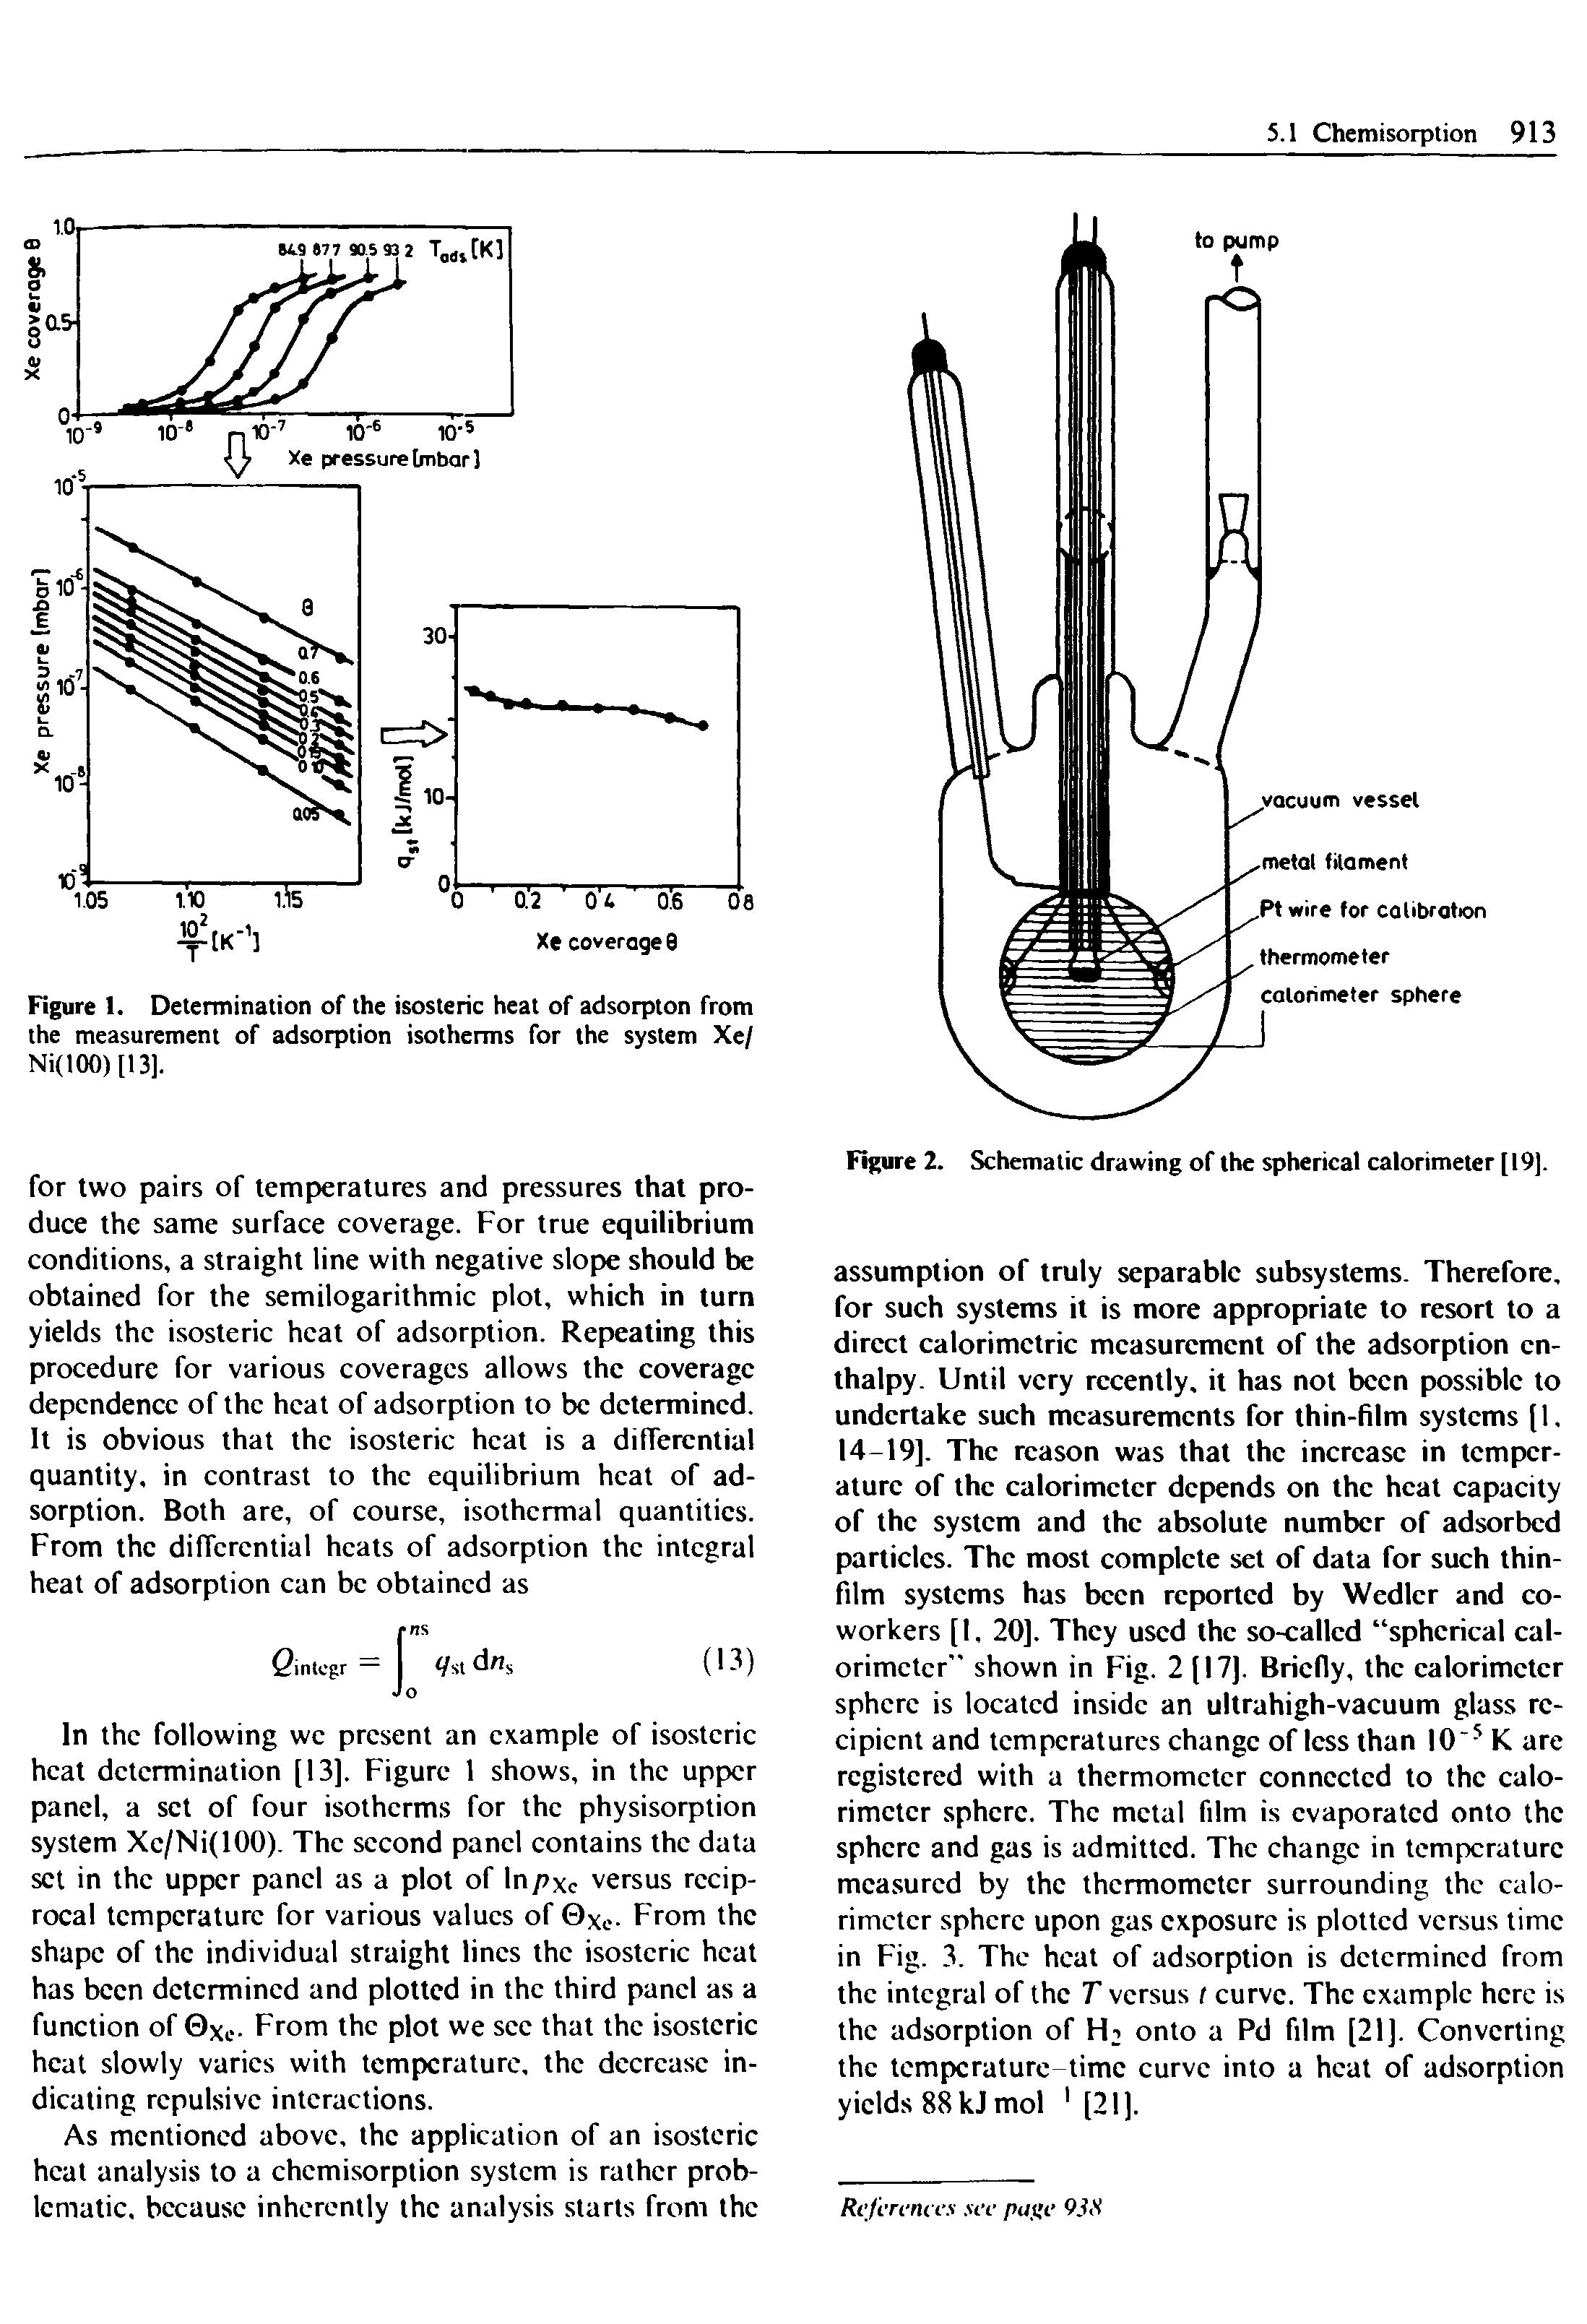 Figure 1. Determination of the isosteric heat of adsorpton from the measurement of adsorption isotherms for the system Xe/ Ni(100) [13].